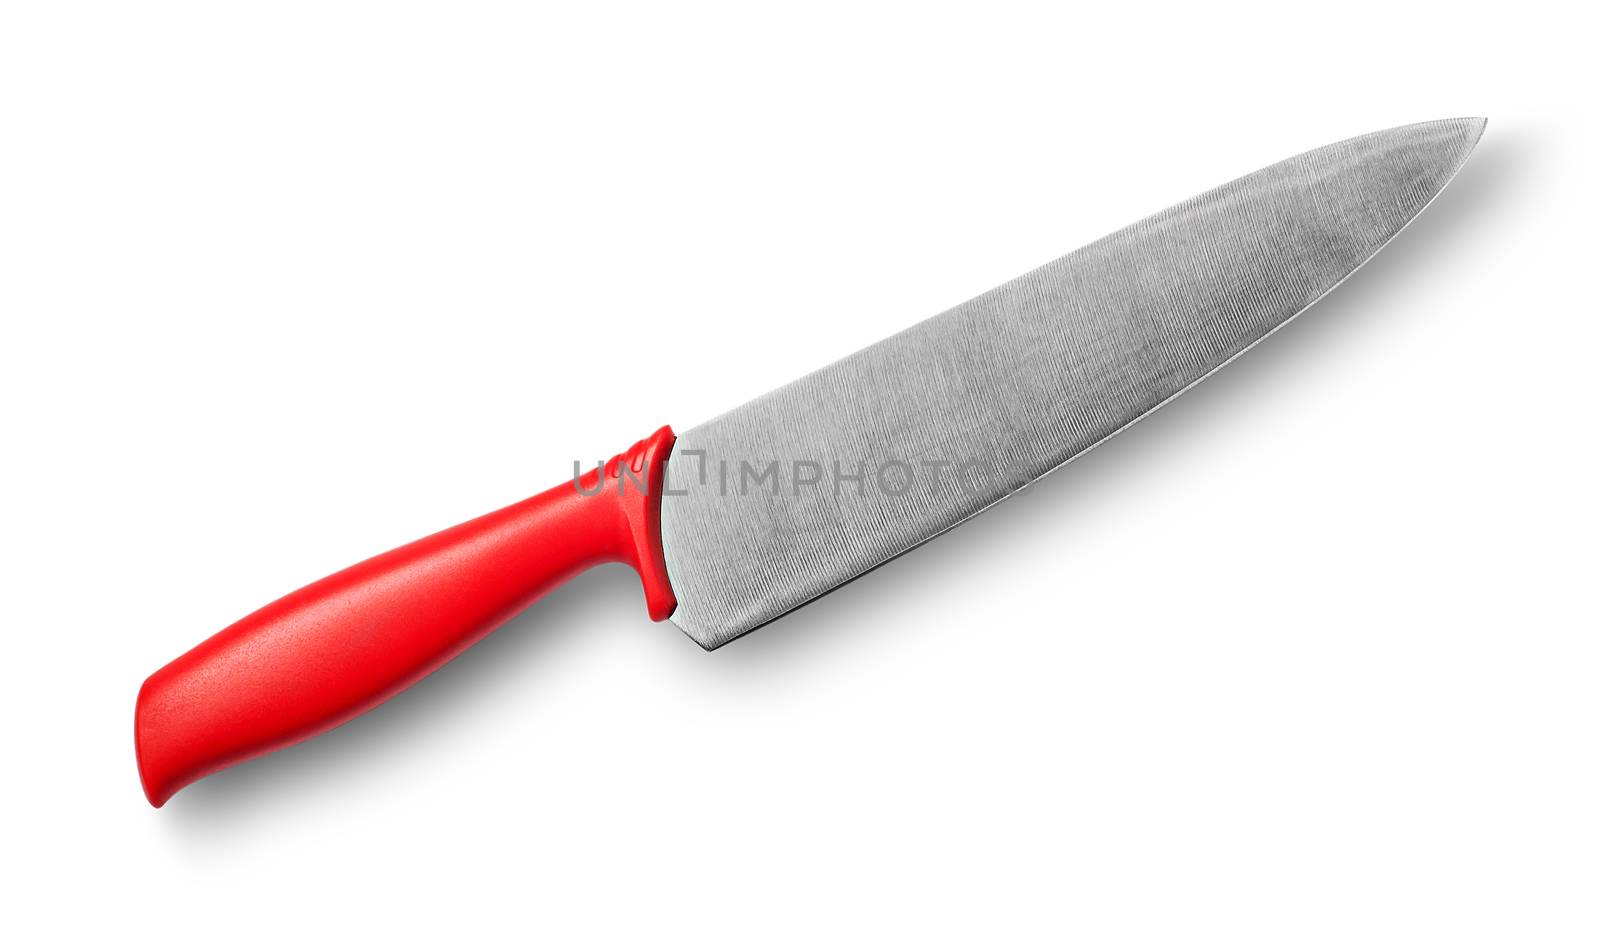 Big kitchen knife with red handle by Cipariss